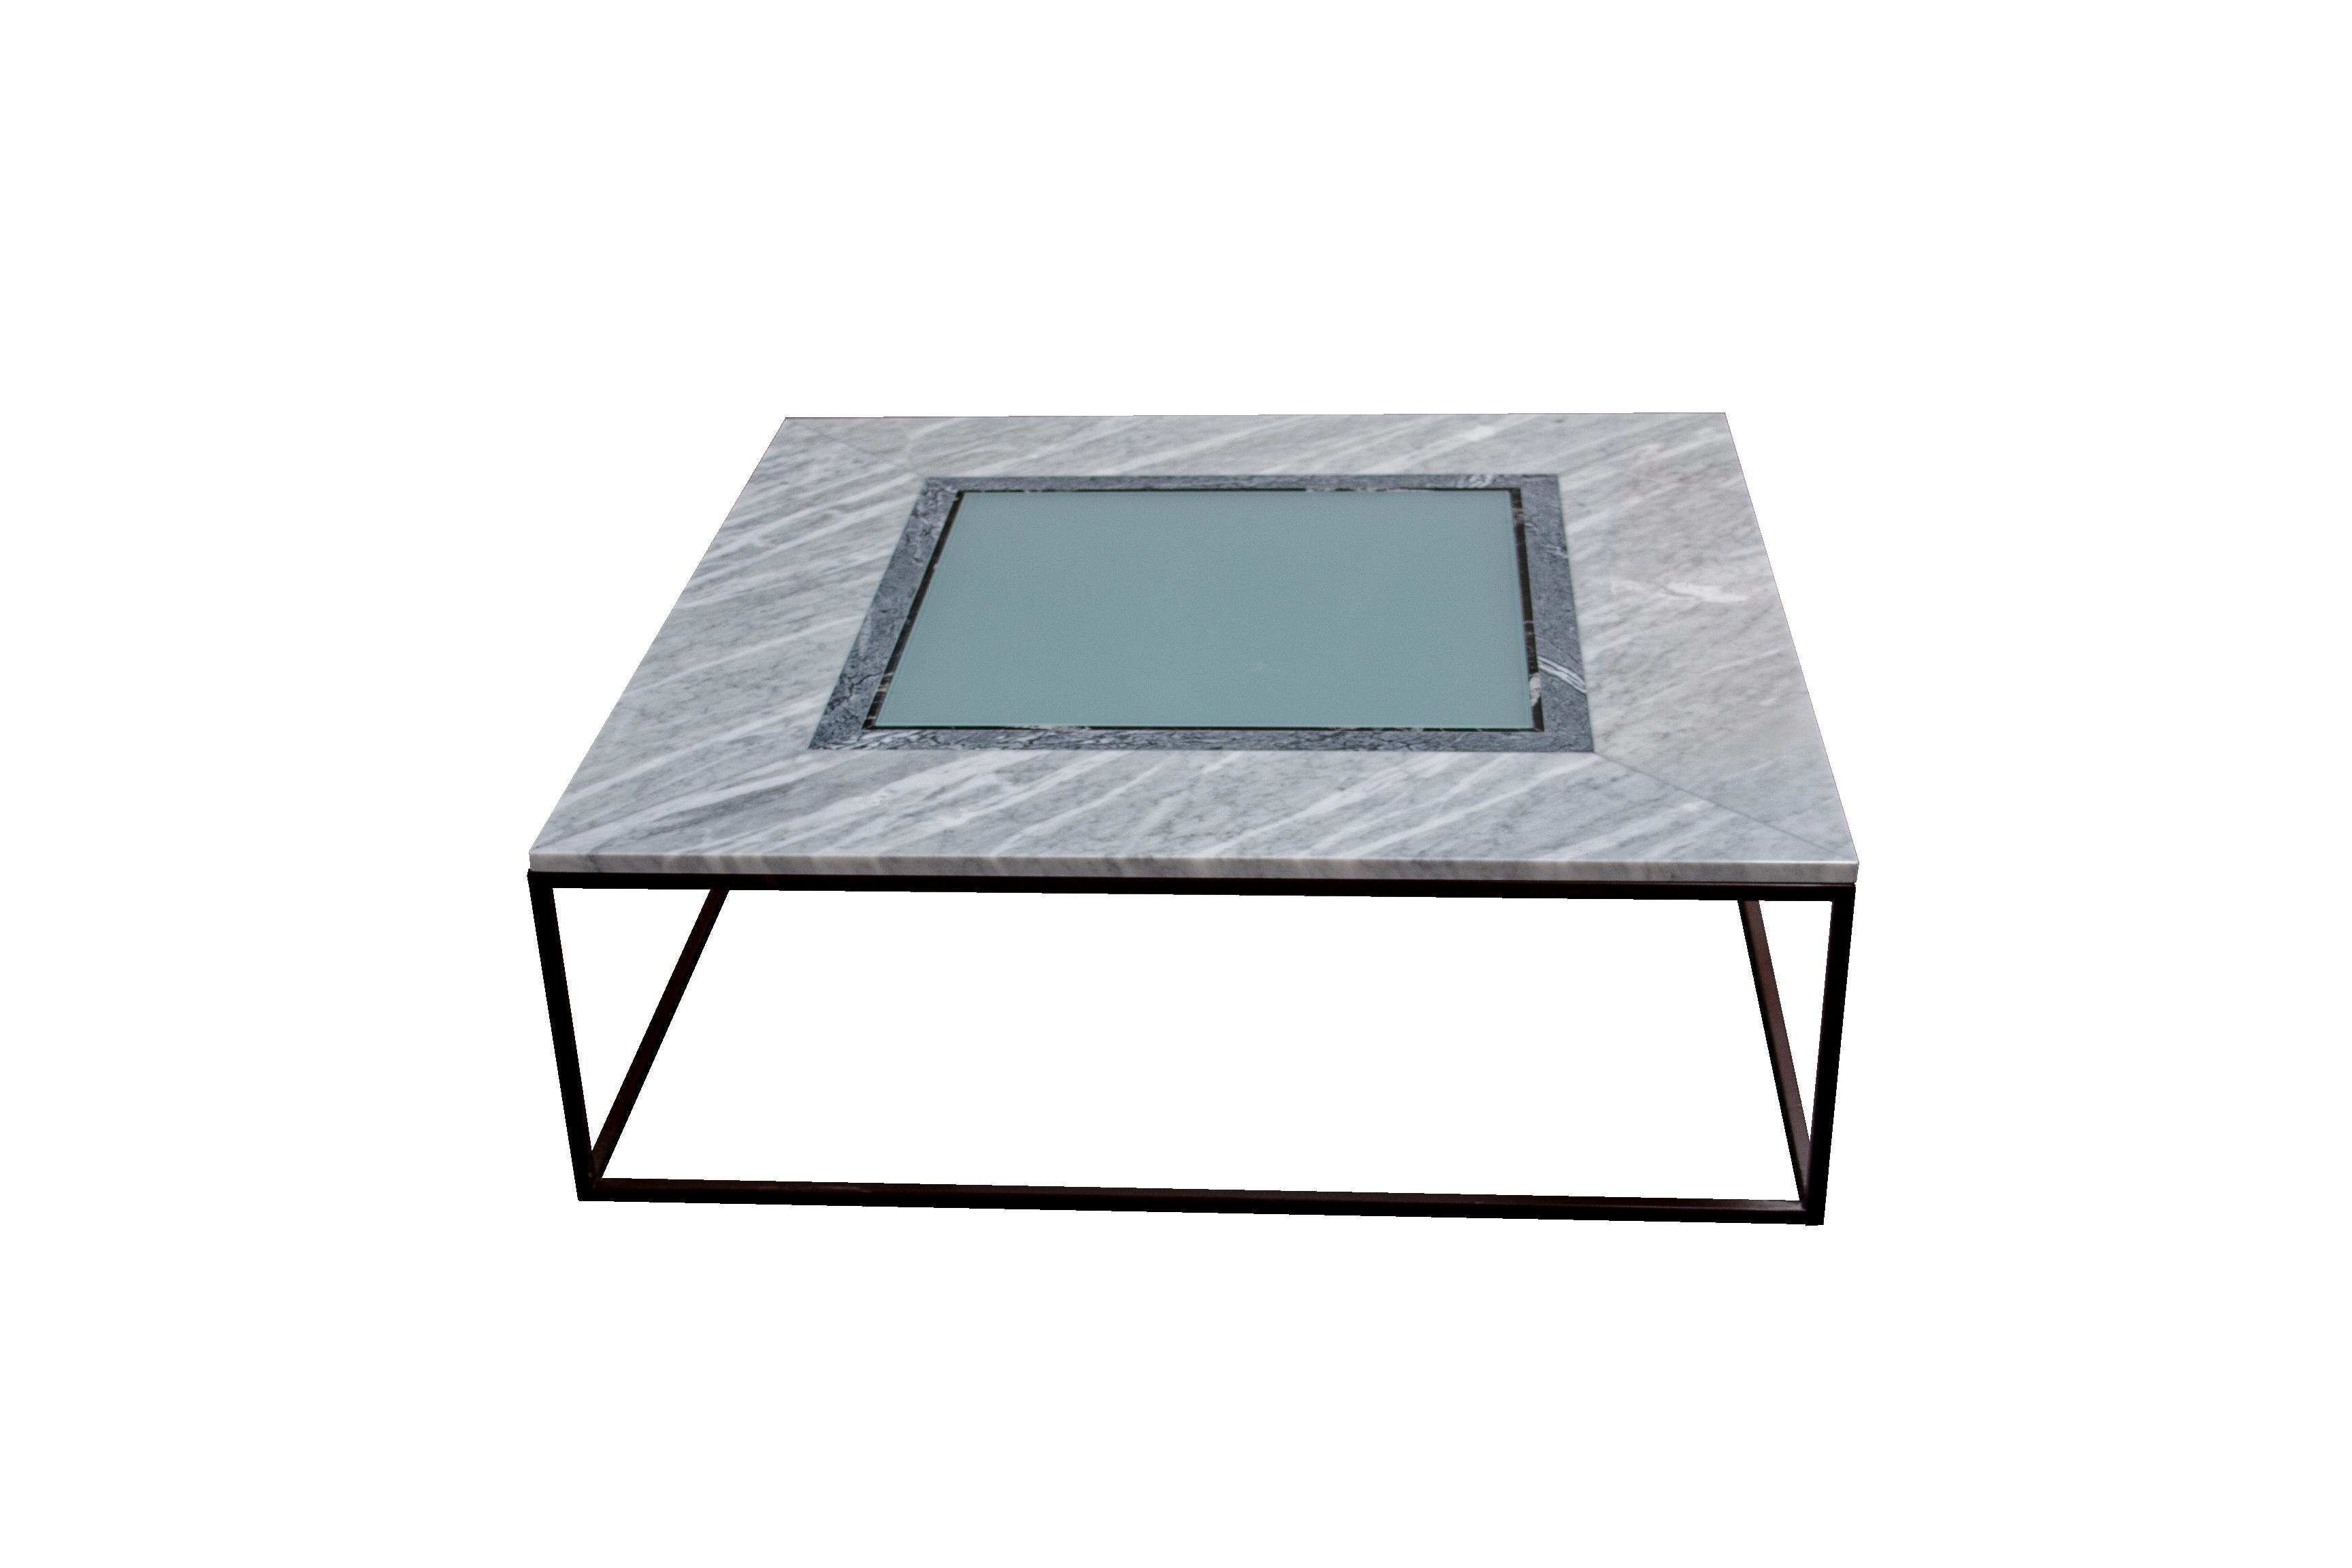 Spanish Coffee Table Grey Marble & Smoked Glass One-of-a-Kind Piece Spain Contemporary For Sale